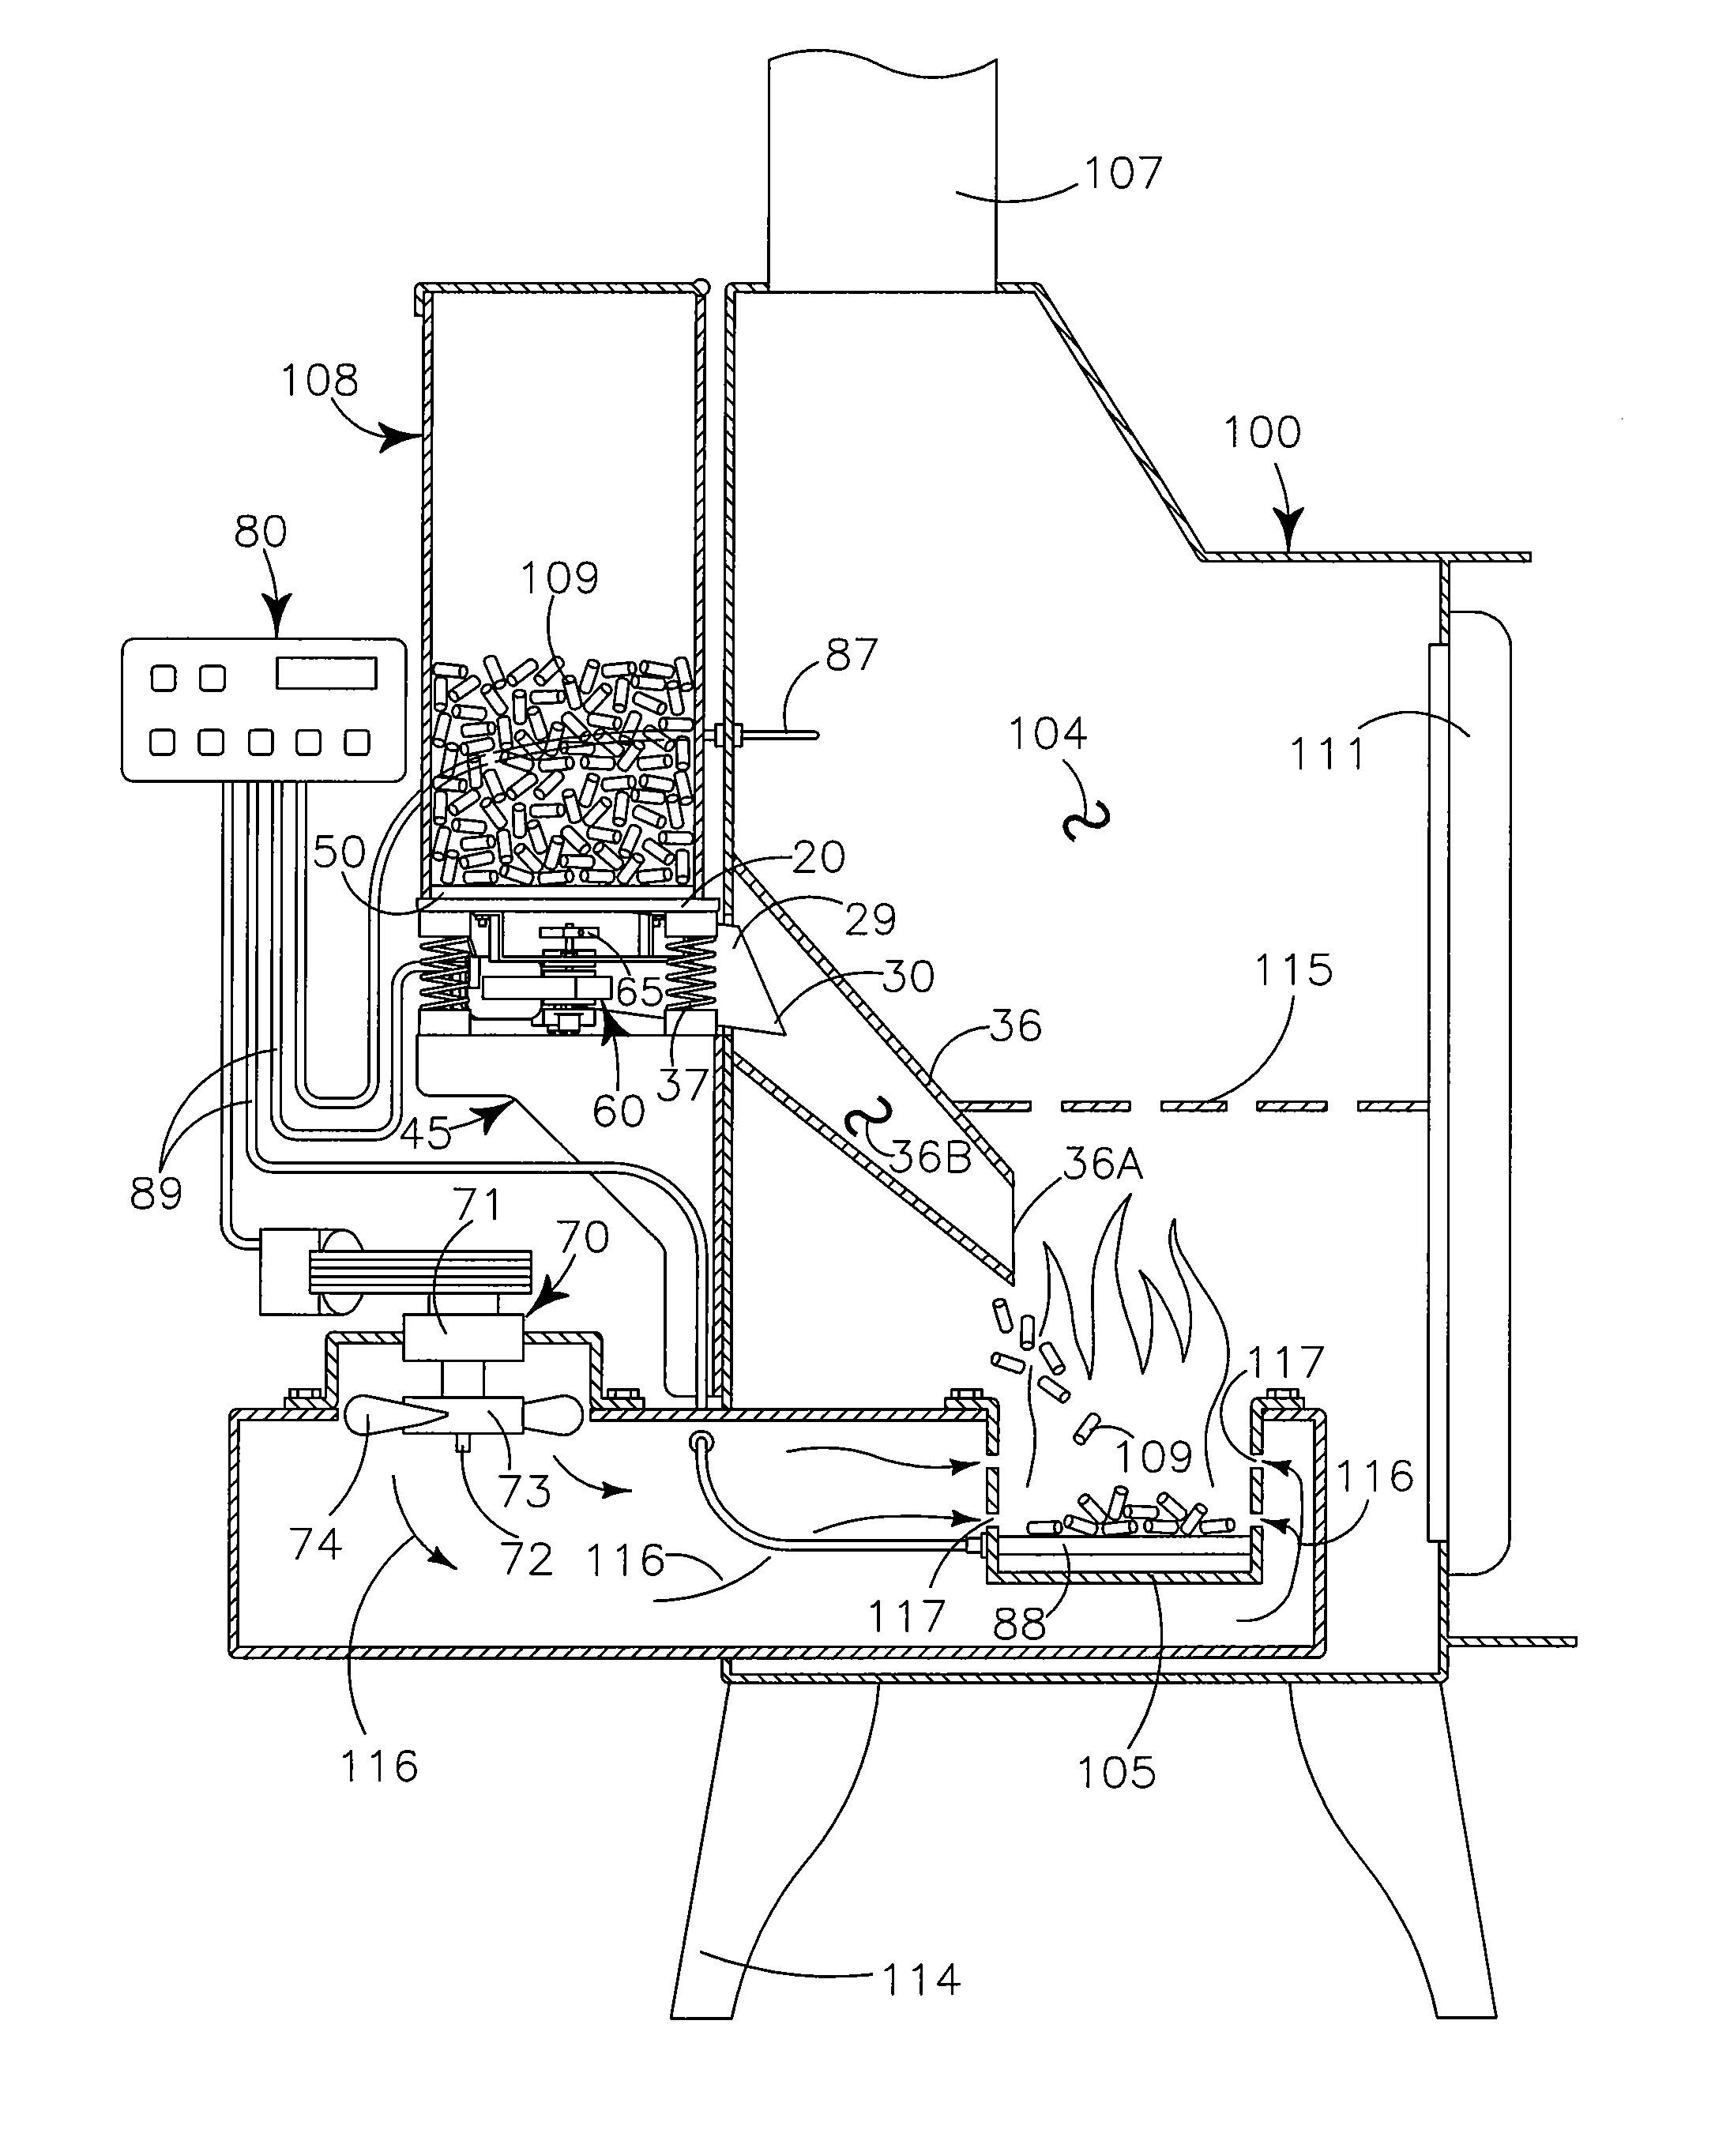 Vibratory feed mechanism for pellet fuel combustion device